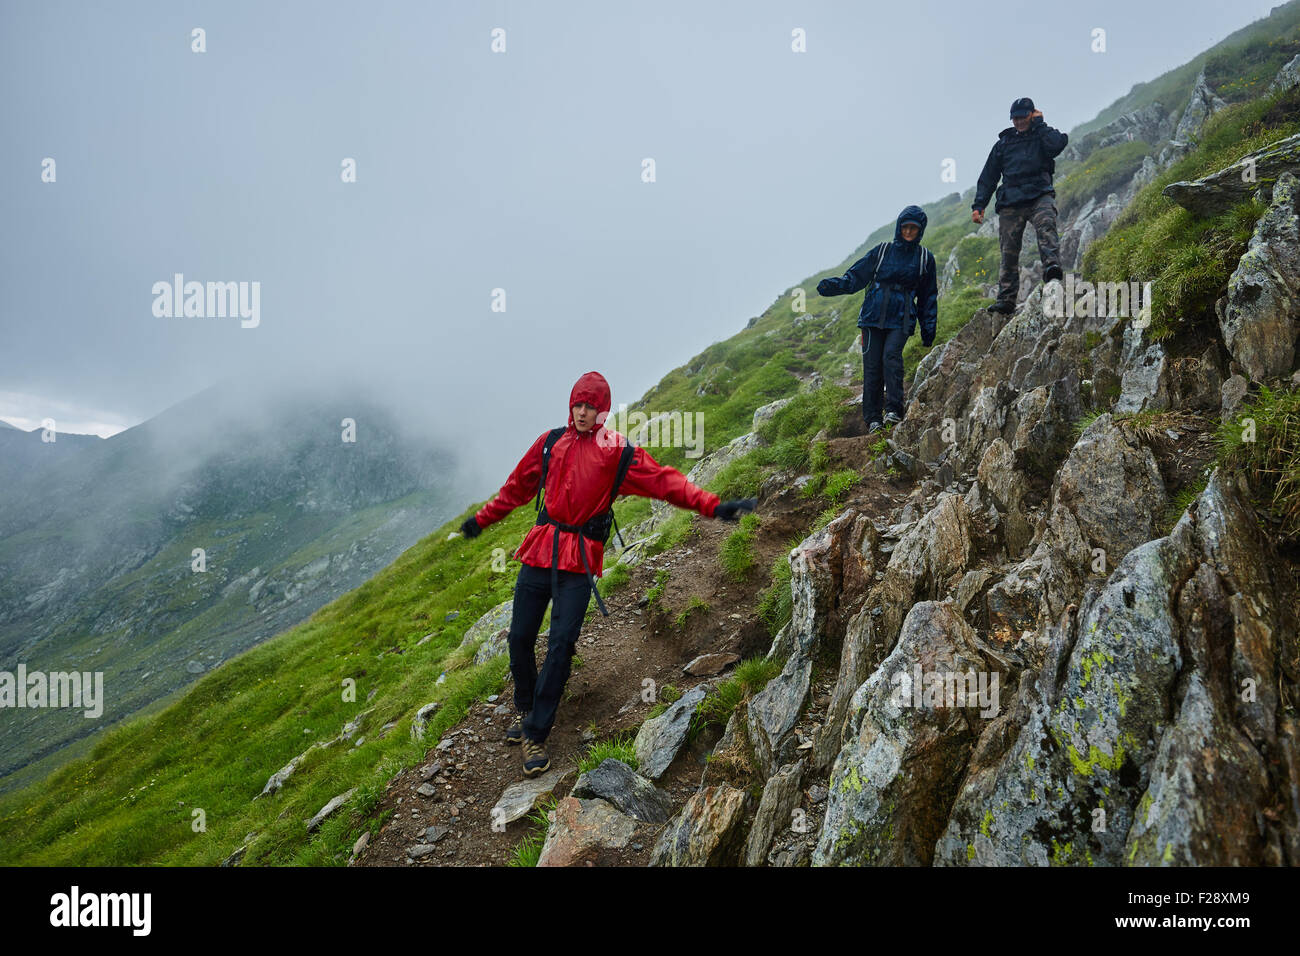 Group of hikers descending on a mountain with raincoats during rain Stock Photo